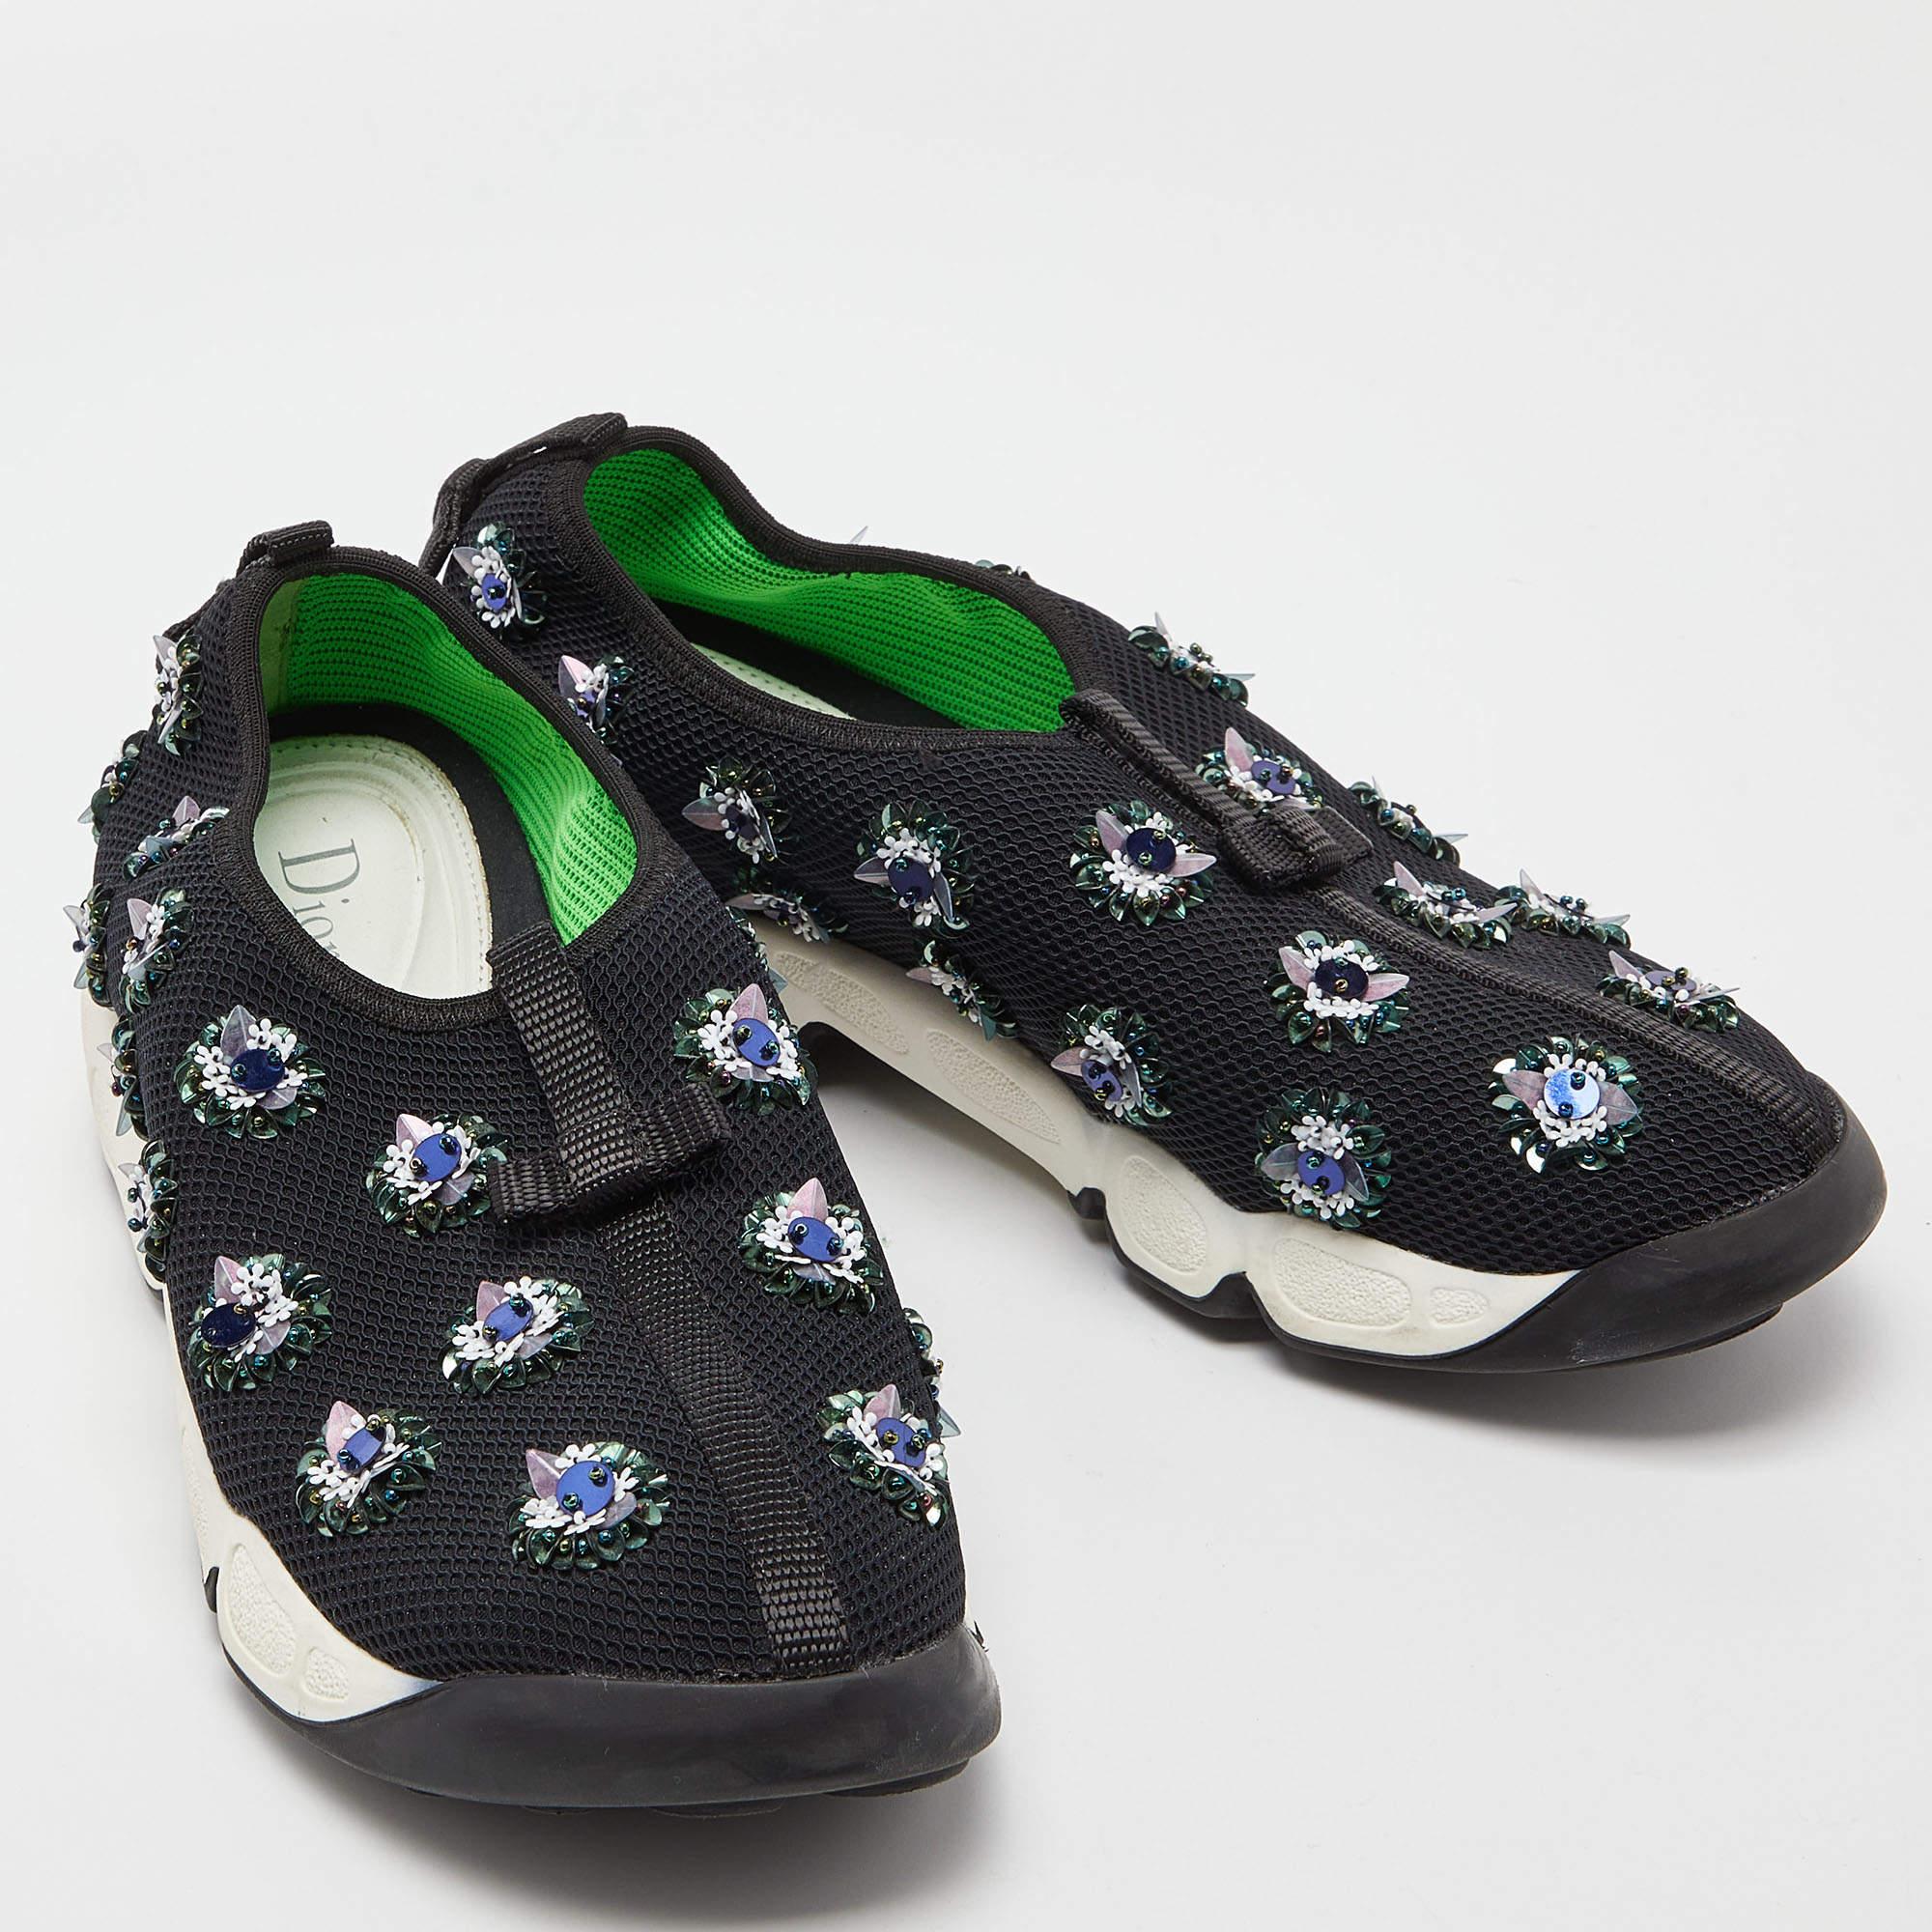 The trend set by these Fusion sneakers from Dior is one you must try. The sneakers are designed with embellishments all over and set on rubber soles that are detailed with subtle branding. They are high in comfort and style, just perfect to be worn